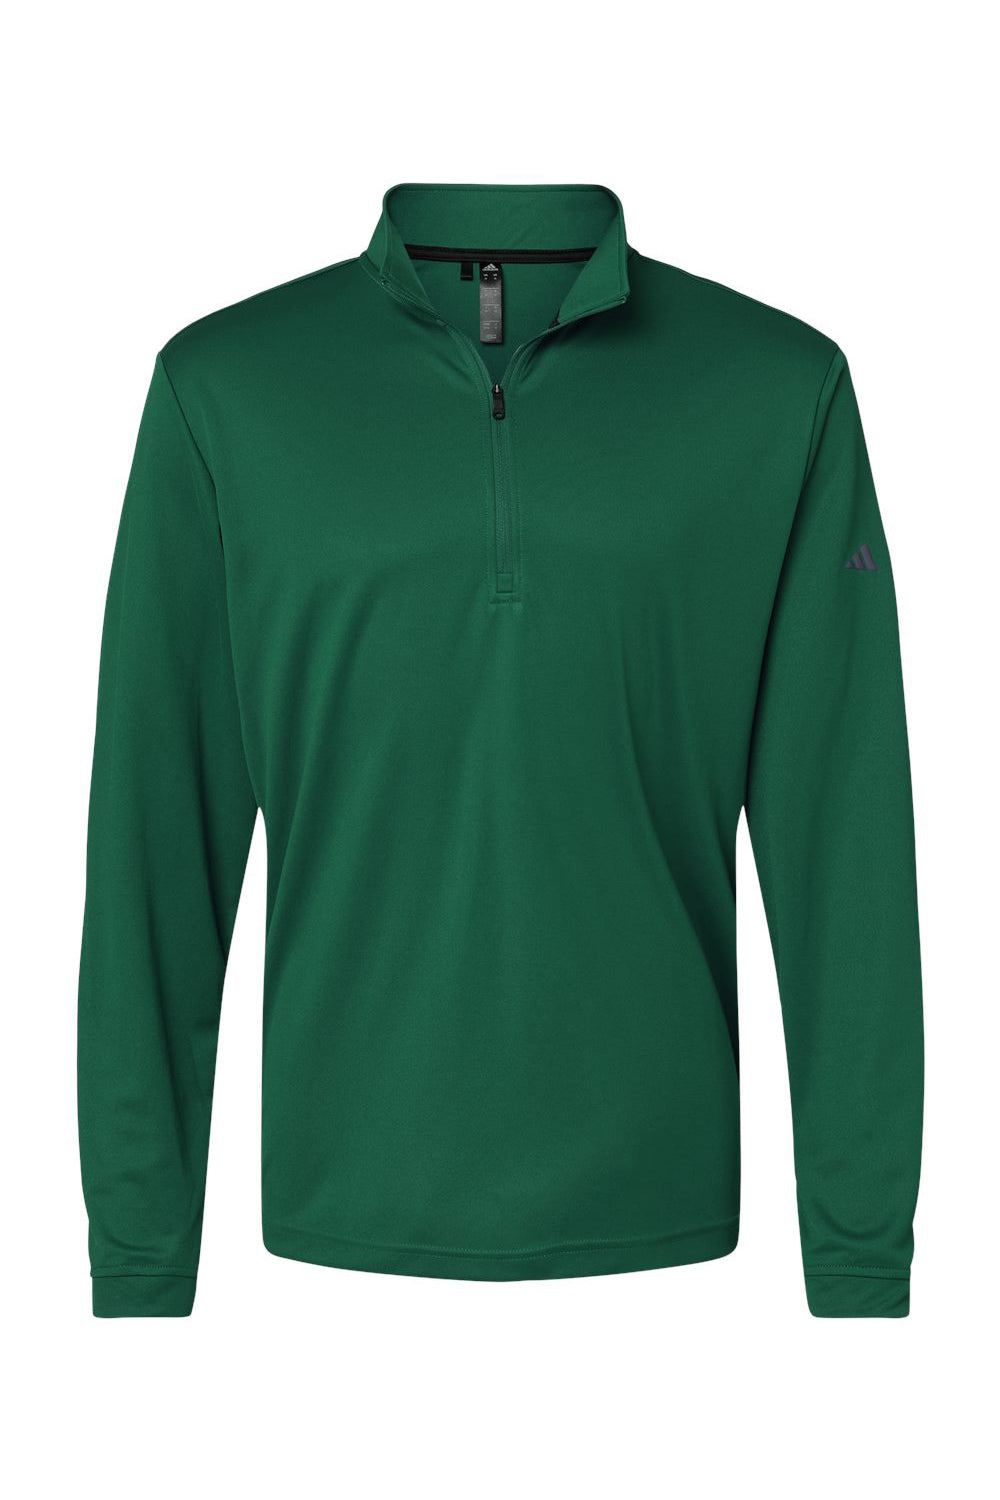 Adidas A401 Mens 1/4 Zip Pullover Collegiate Green Flat Front